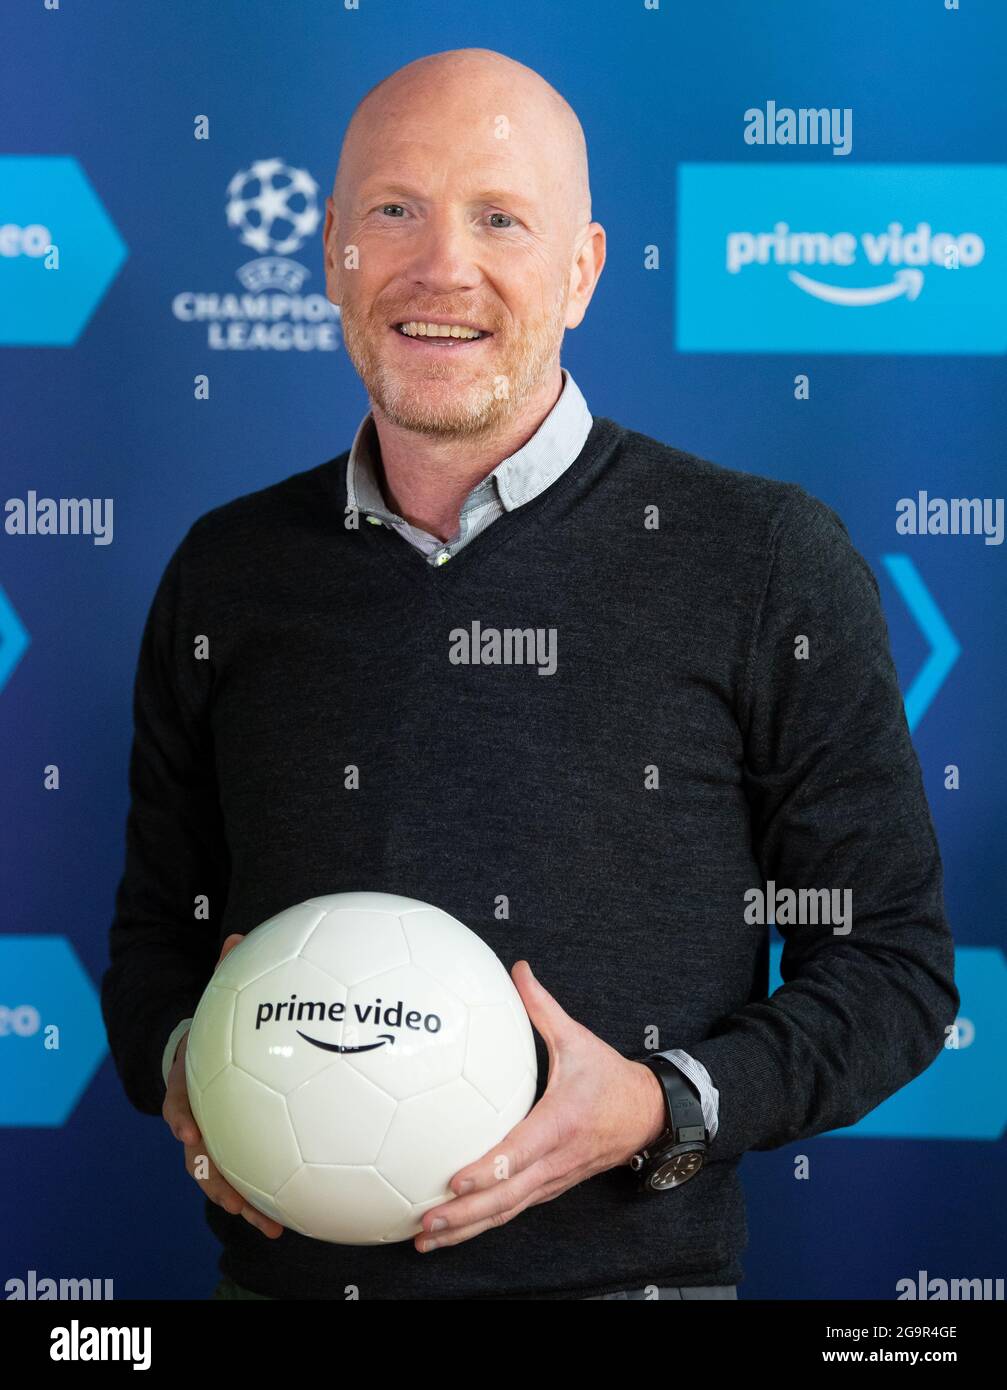 Munich, Germany. 27th July, 2021. Matthias Sammer, TV expert, takes part in  a press conference of  Prime Video.  will be showing Champions  League matches from the 2021/22 season. On its